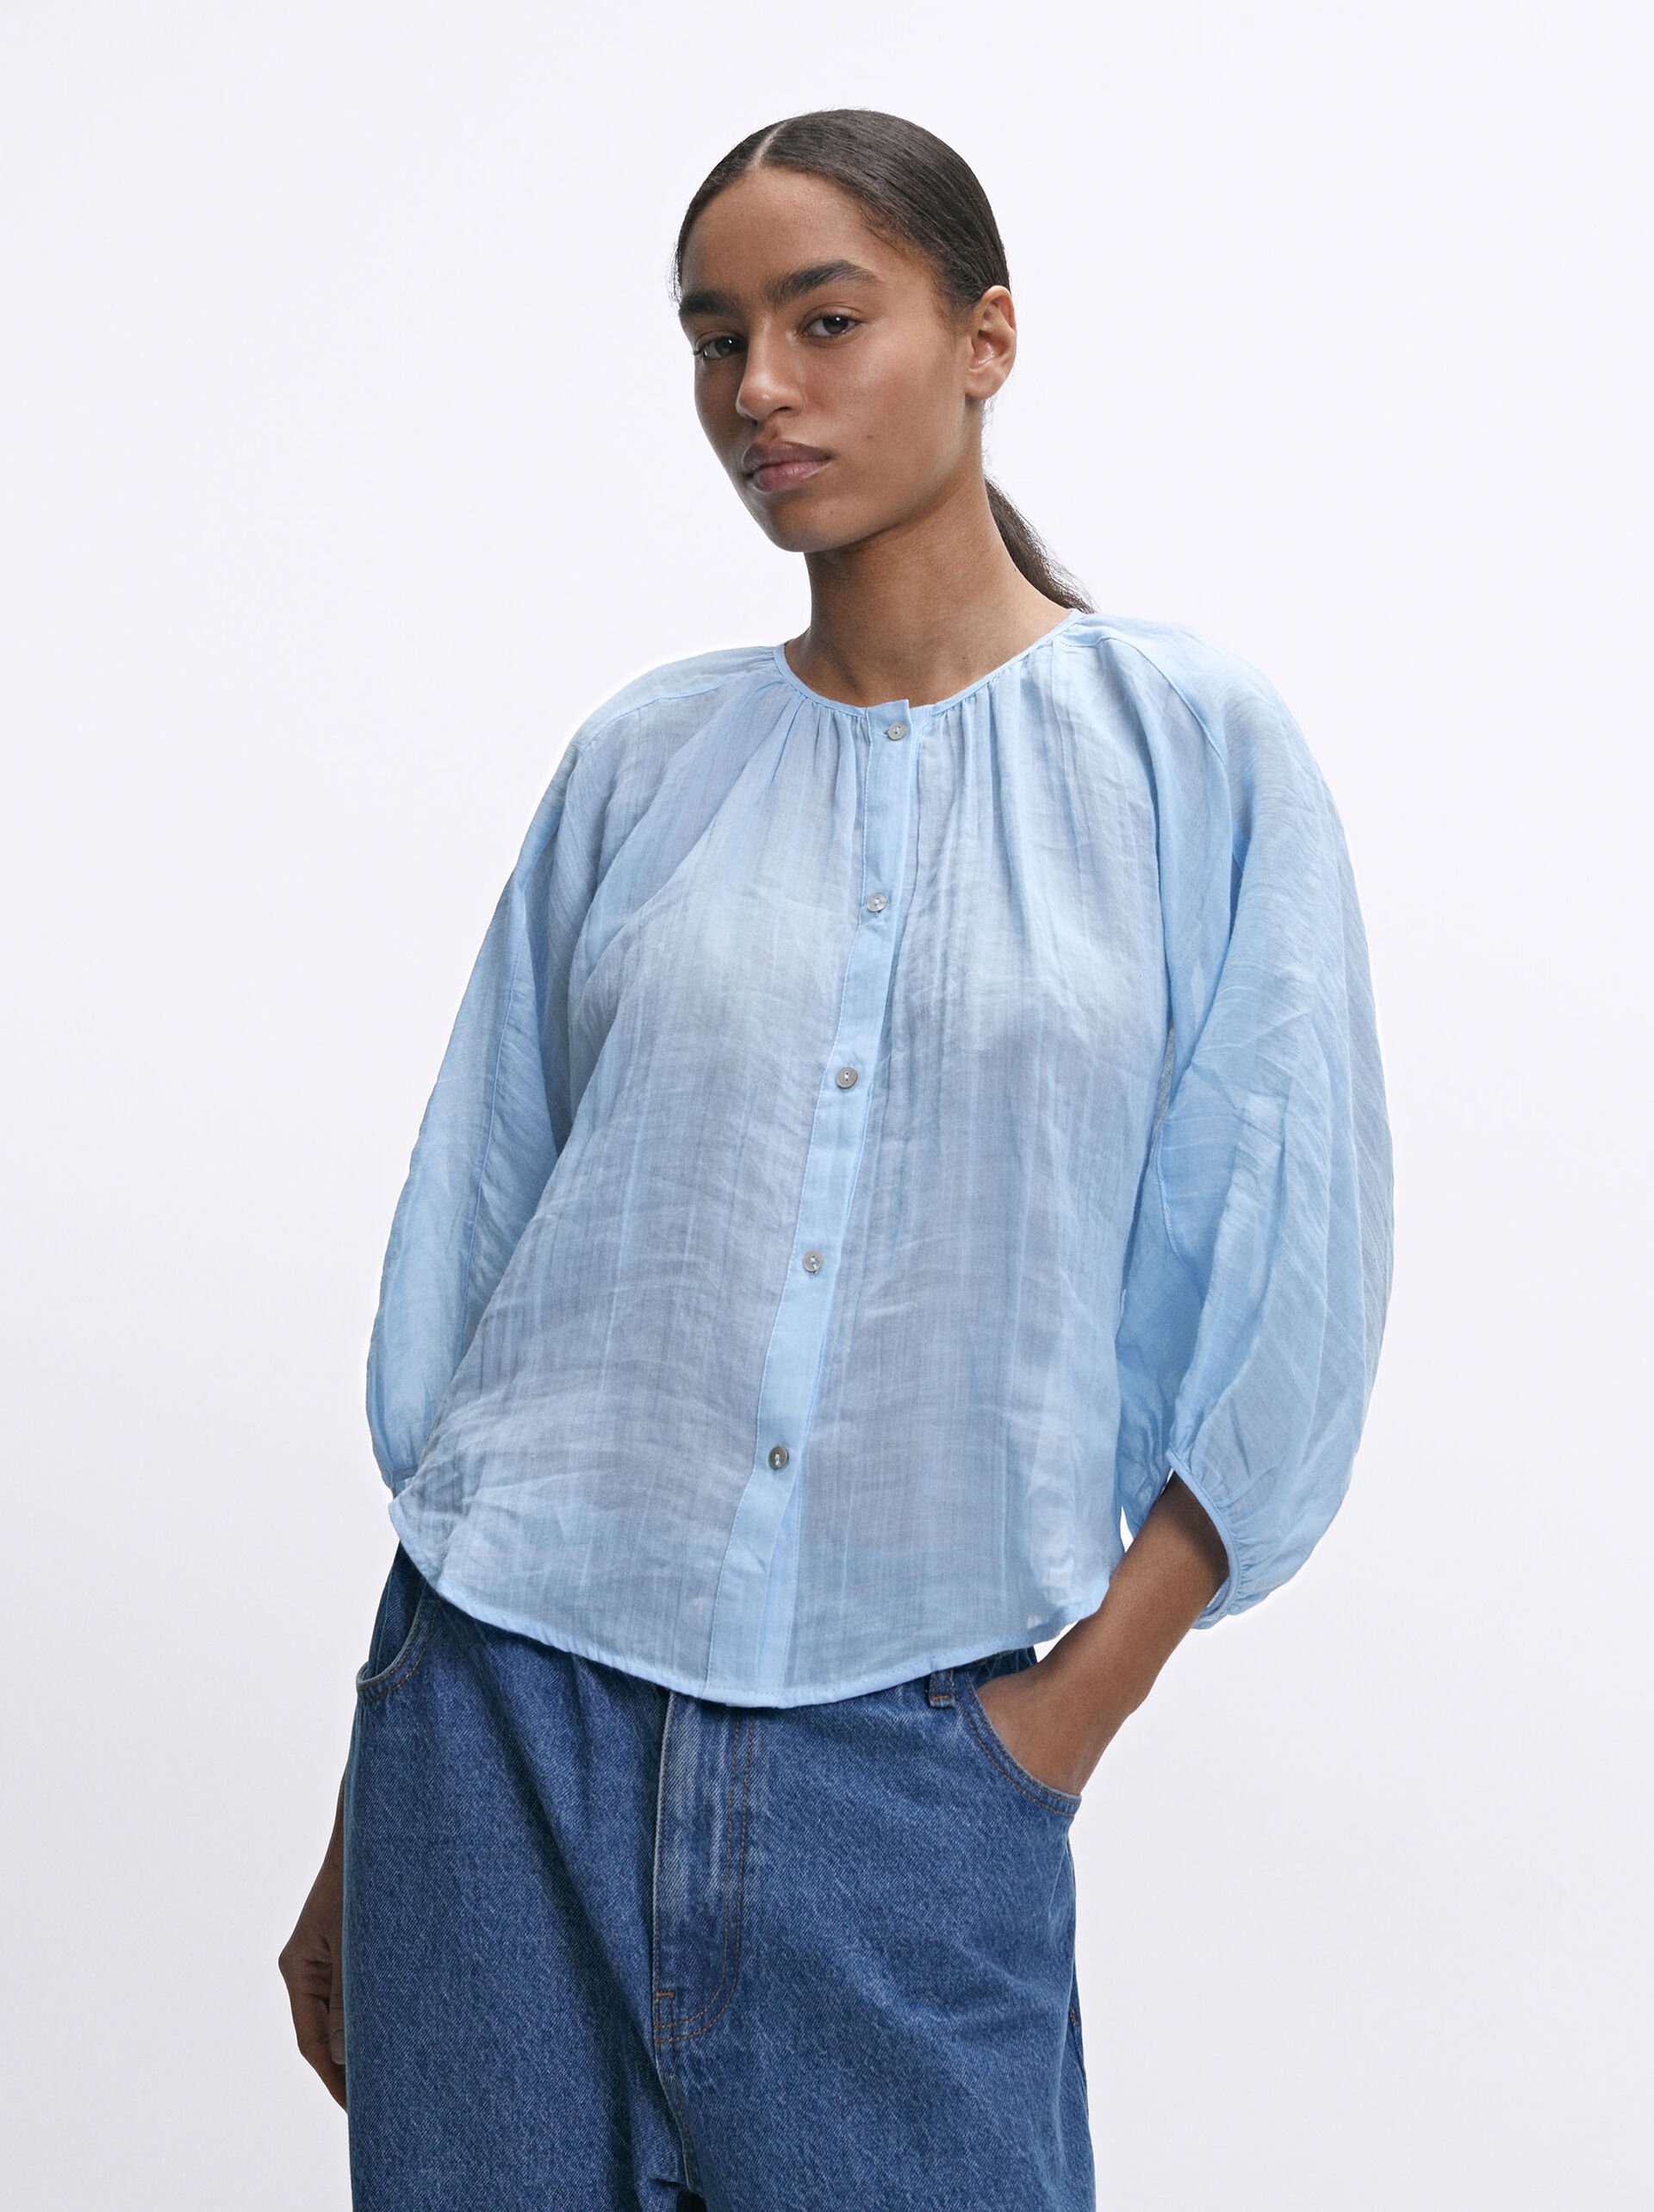 Puff Sleeve Shirt image number 1.0